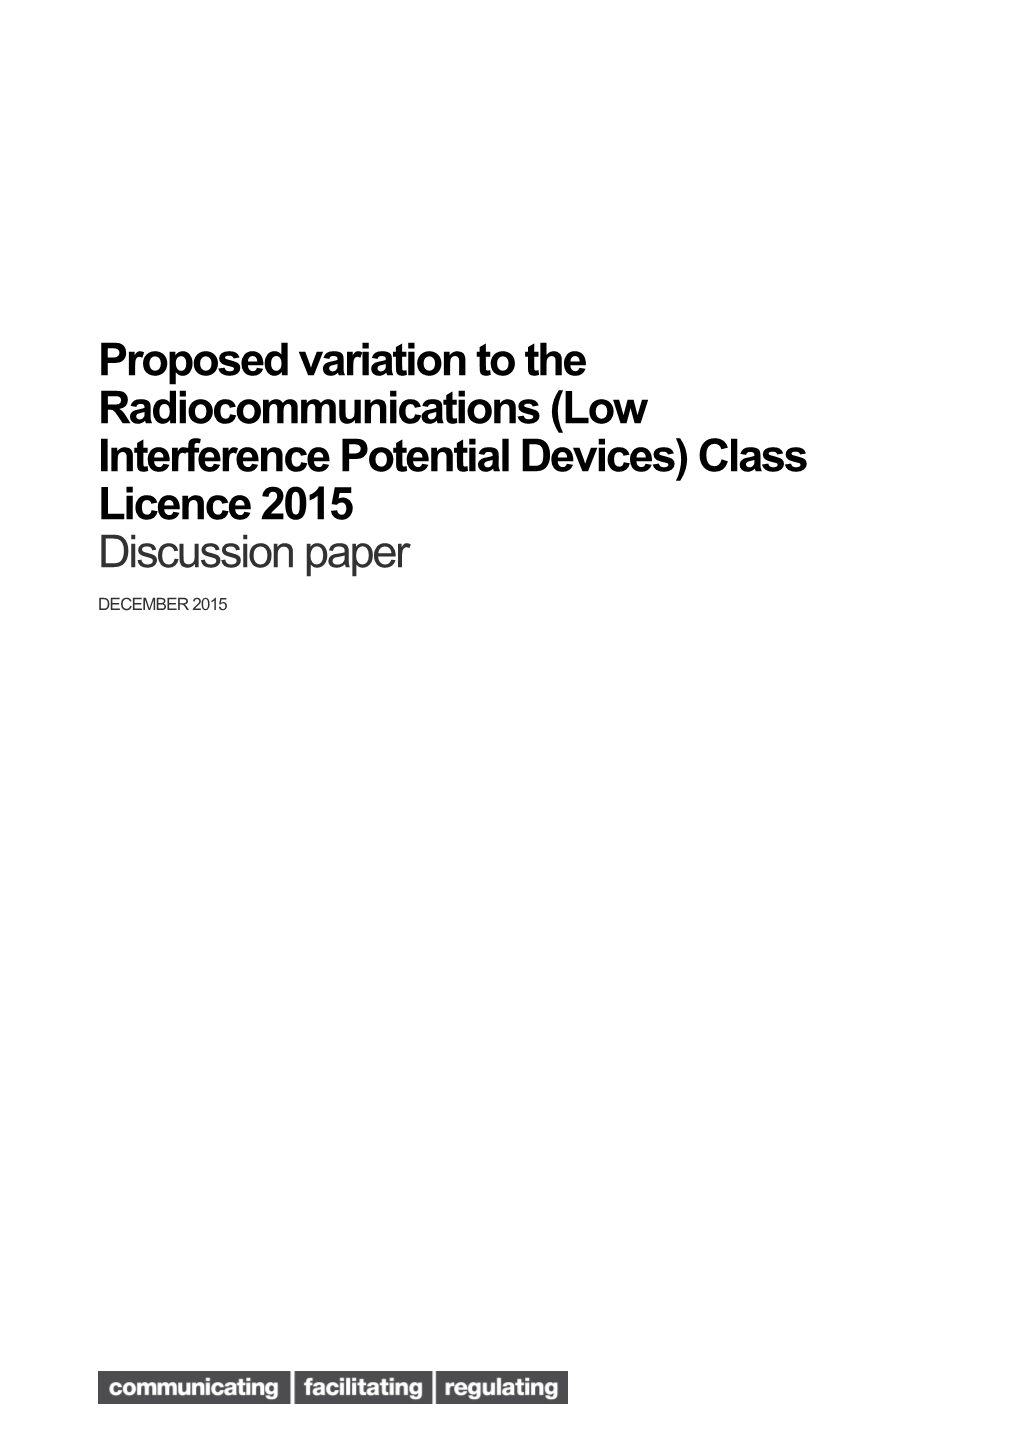 Proposed Variation to the Radiocommunications (Low Interference Potential Devices) Class